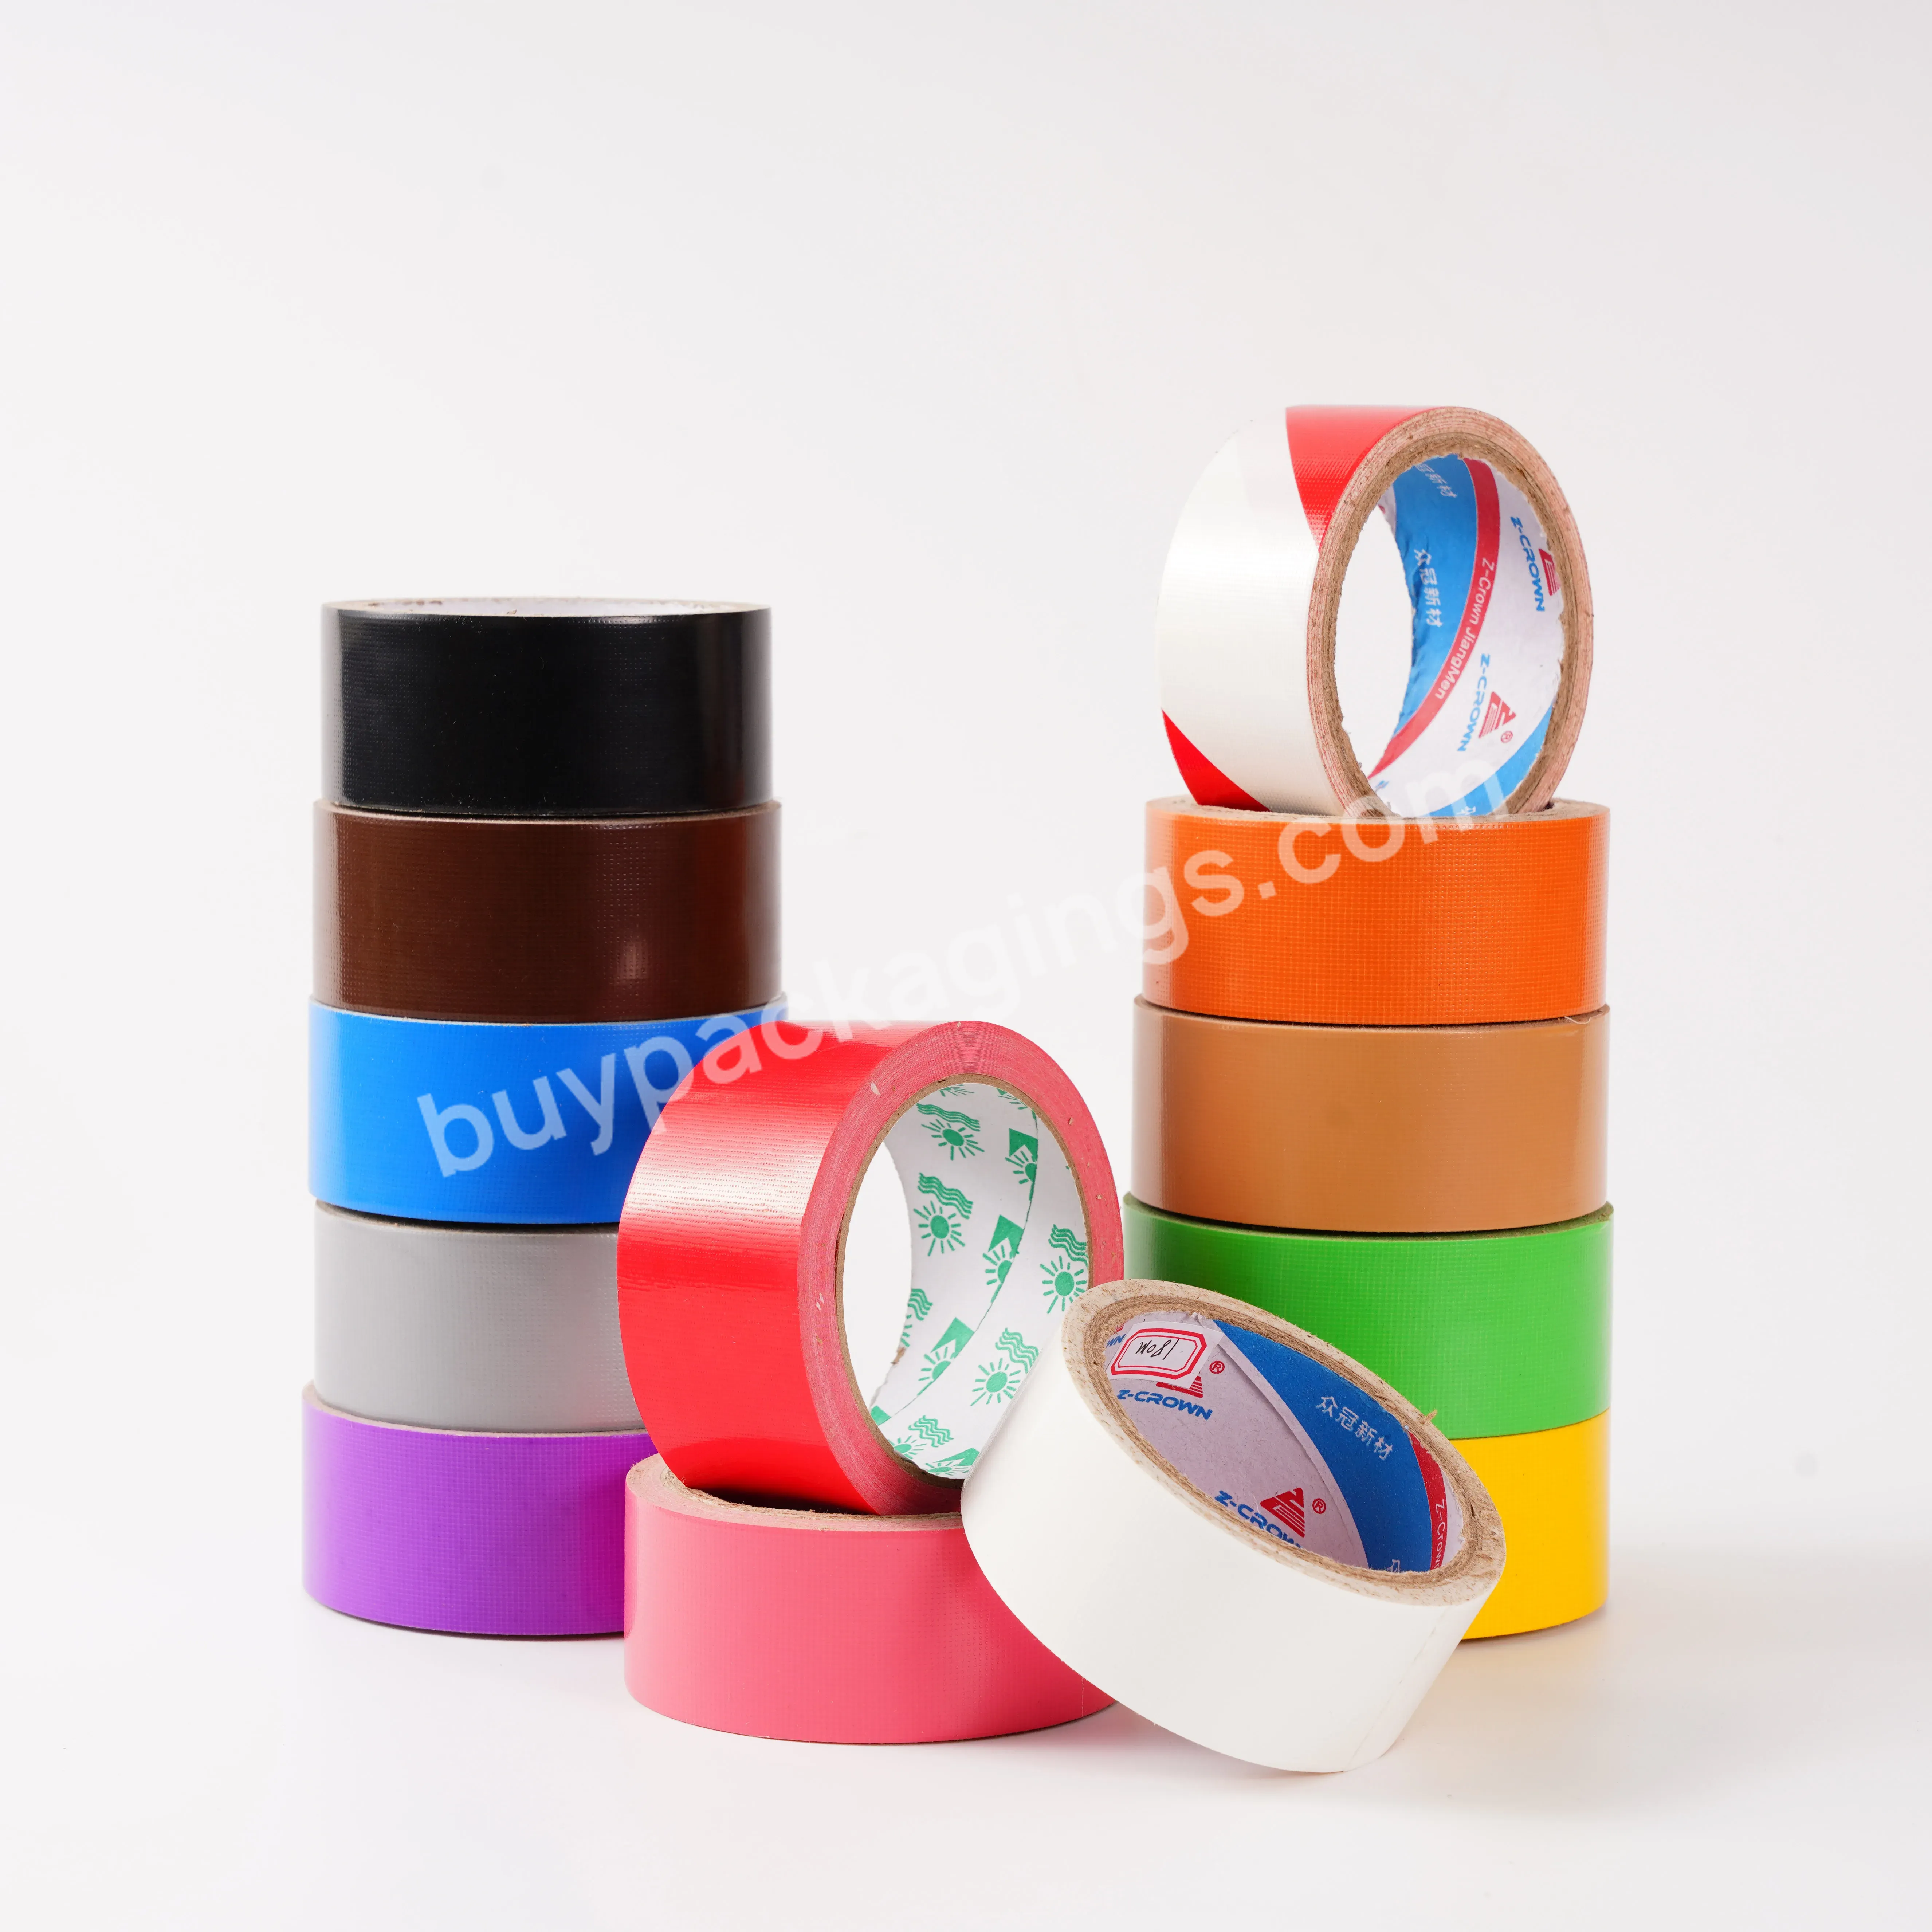 Custom Strong Clothes Adhesive Duct Tape Easy To Tear By Hand For Air Conditioner - Buy Duct Tape Adhesive,Clothes Tape,Custom Duct Tape.